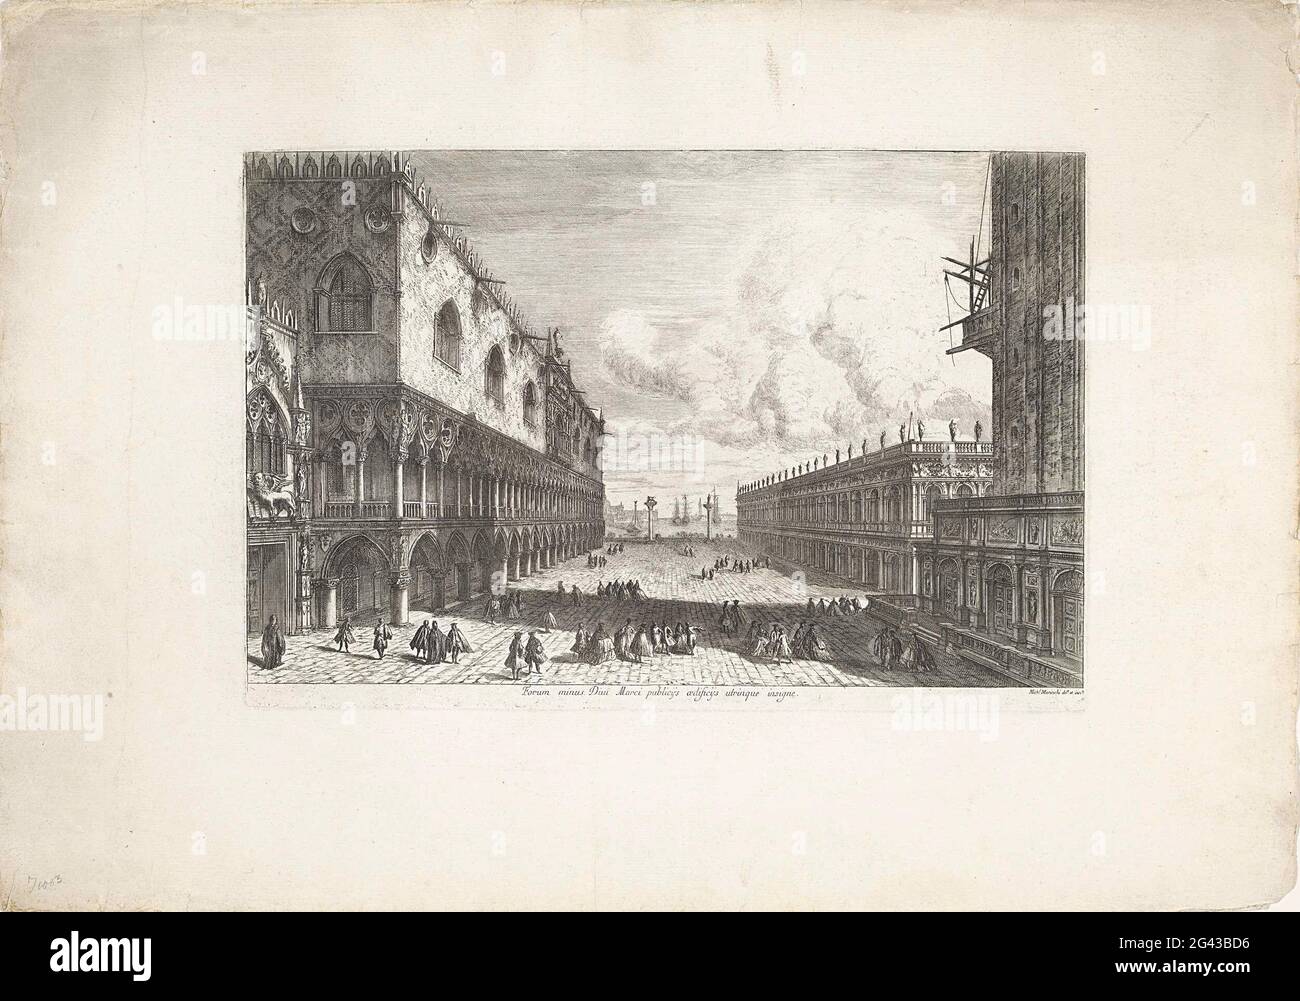 Piazza San Marco in Venice; Forum Minus Divi Marci Publicijs Utrinque Insigne; Faces on Venice; Magnificentiores Selectioresque Urbis VenetiaRum Prospectus. View of the San Marco Square in Venice with the Palazzo Ducale on the left and on the right the Biblioteca Nazionale Marciana. Stock Photo